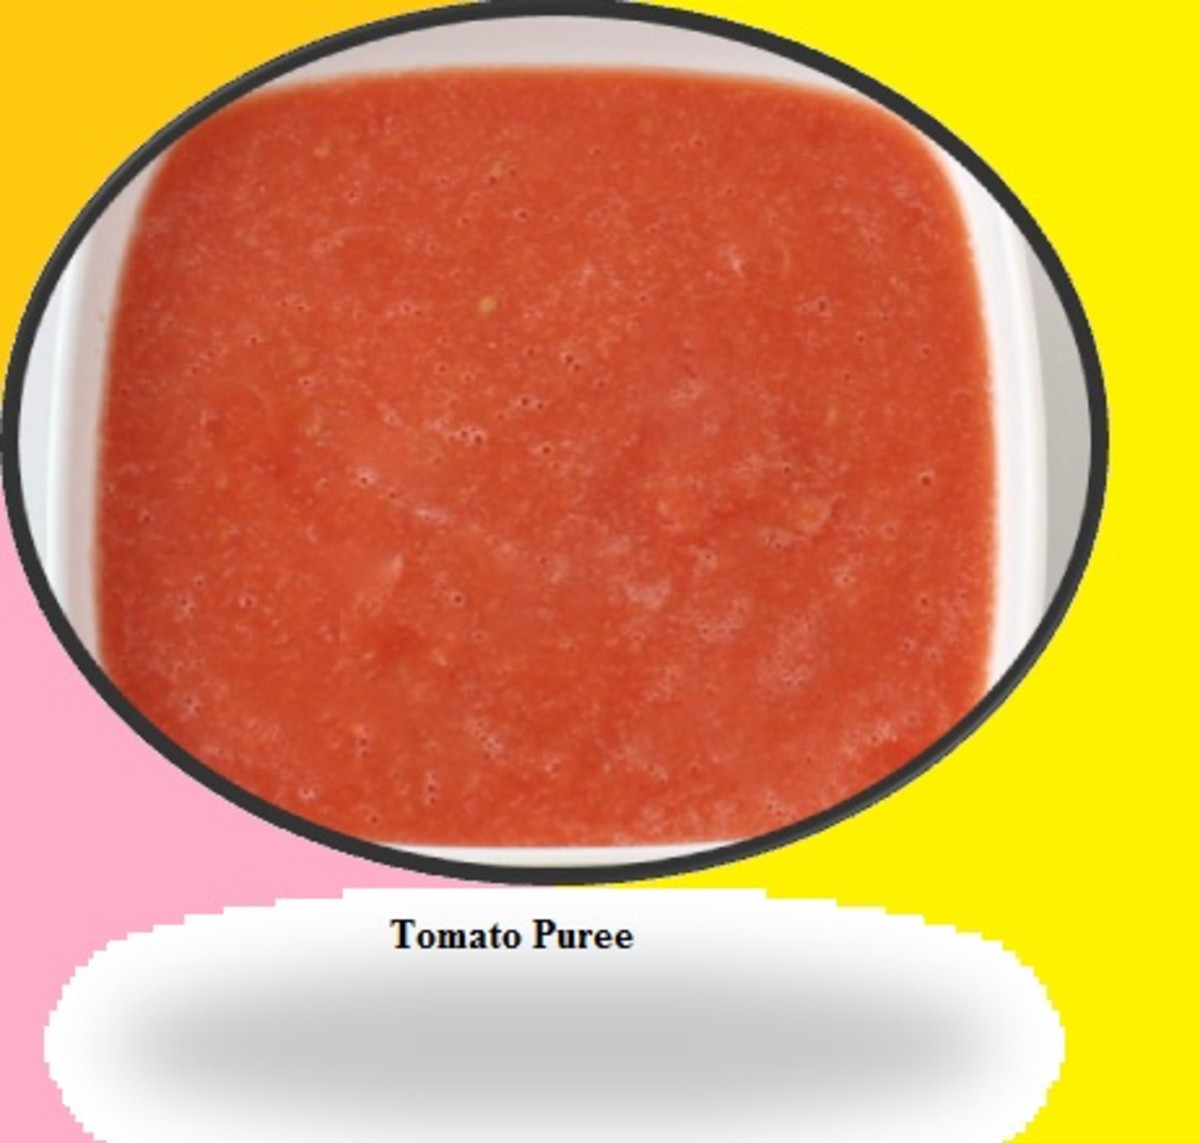 tomato-an-excellent-vegetable-and-delicious-sauce-maker